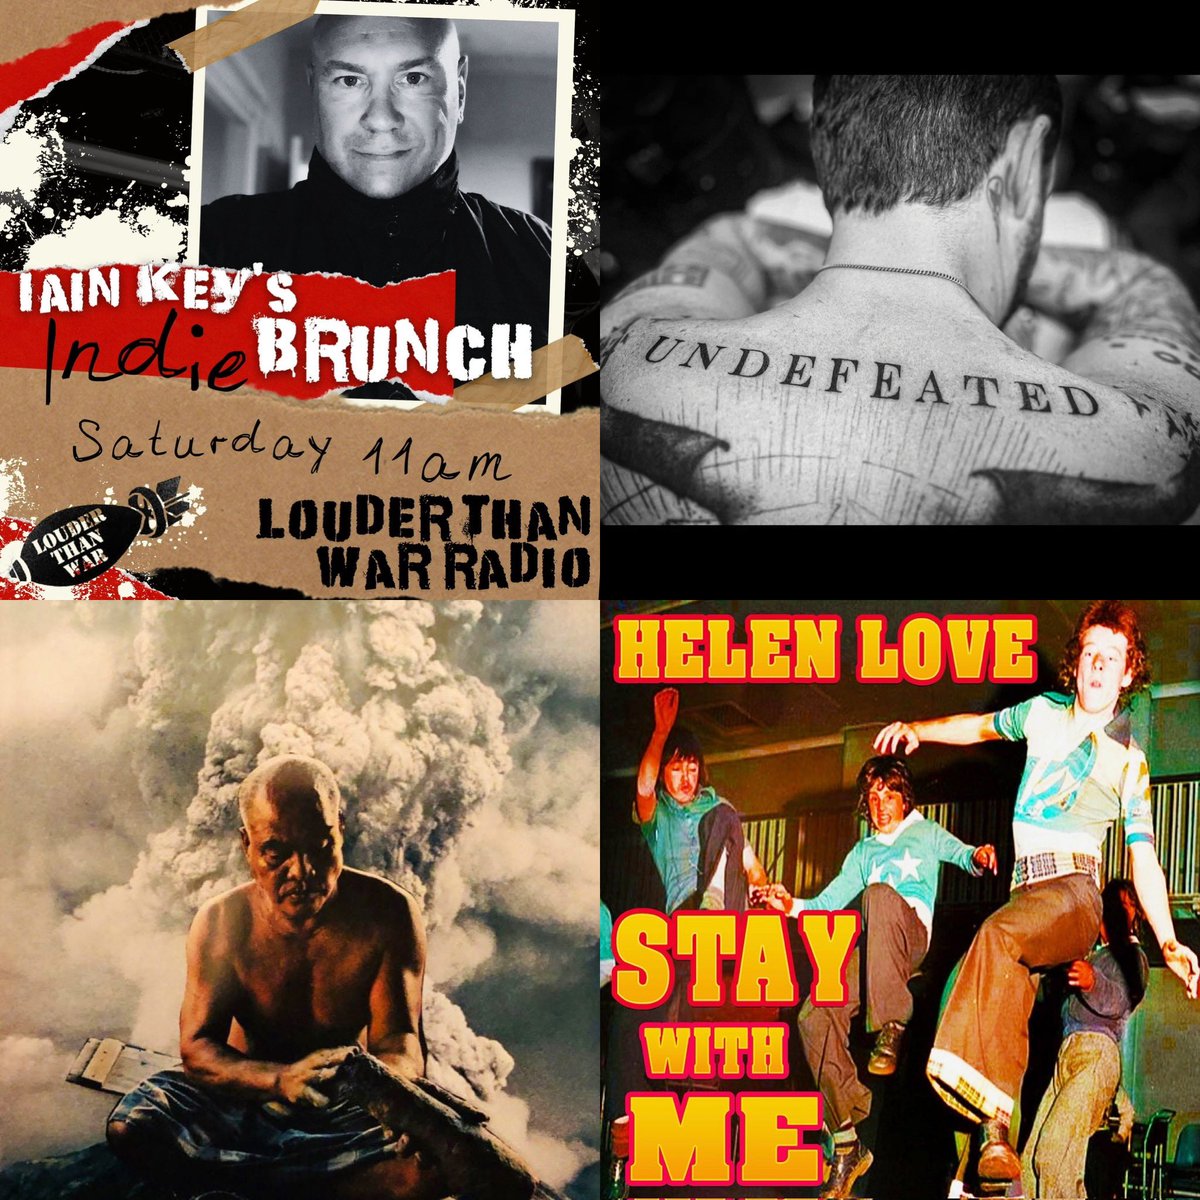 This weekend in my Indie Brunch for @louderthanwar I'm joined by @frankturner Frank's picked a few tracks I'll be playing some from his album Also new releases from @HELENLOVE123 @hellocosmos_ @AutocamperBand @alexspencerUK and an exclusive from @ChrisBridgett @Xtra_Mile